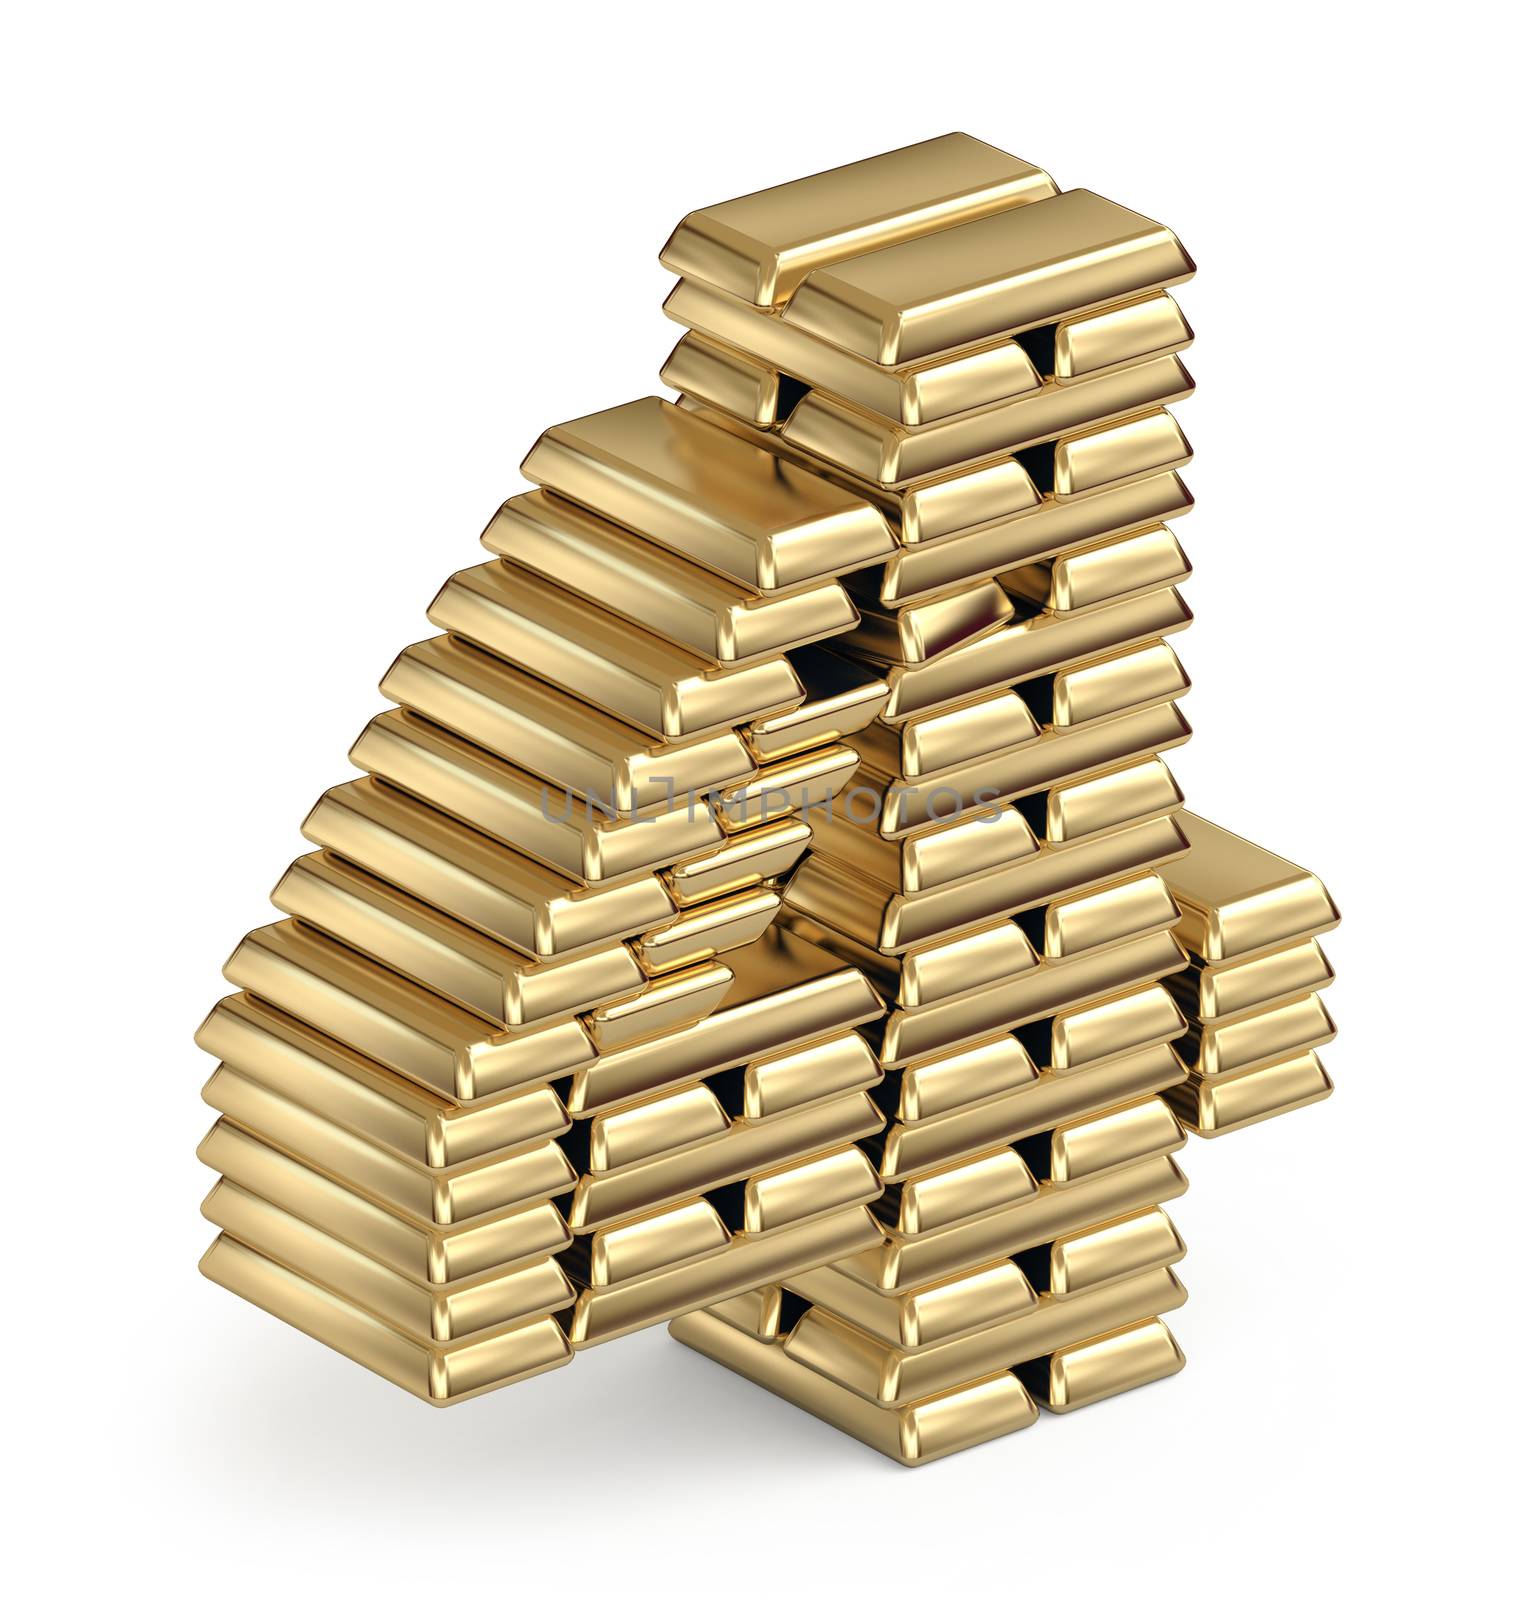 Number 4 from stacked gold bars  3d in isometric on white background